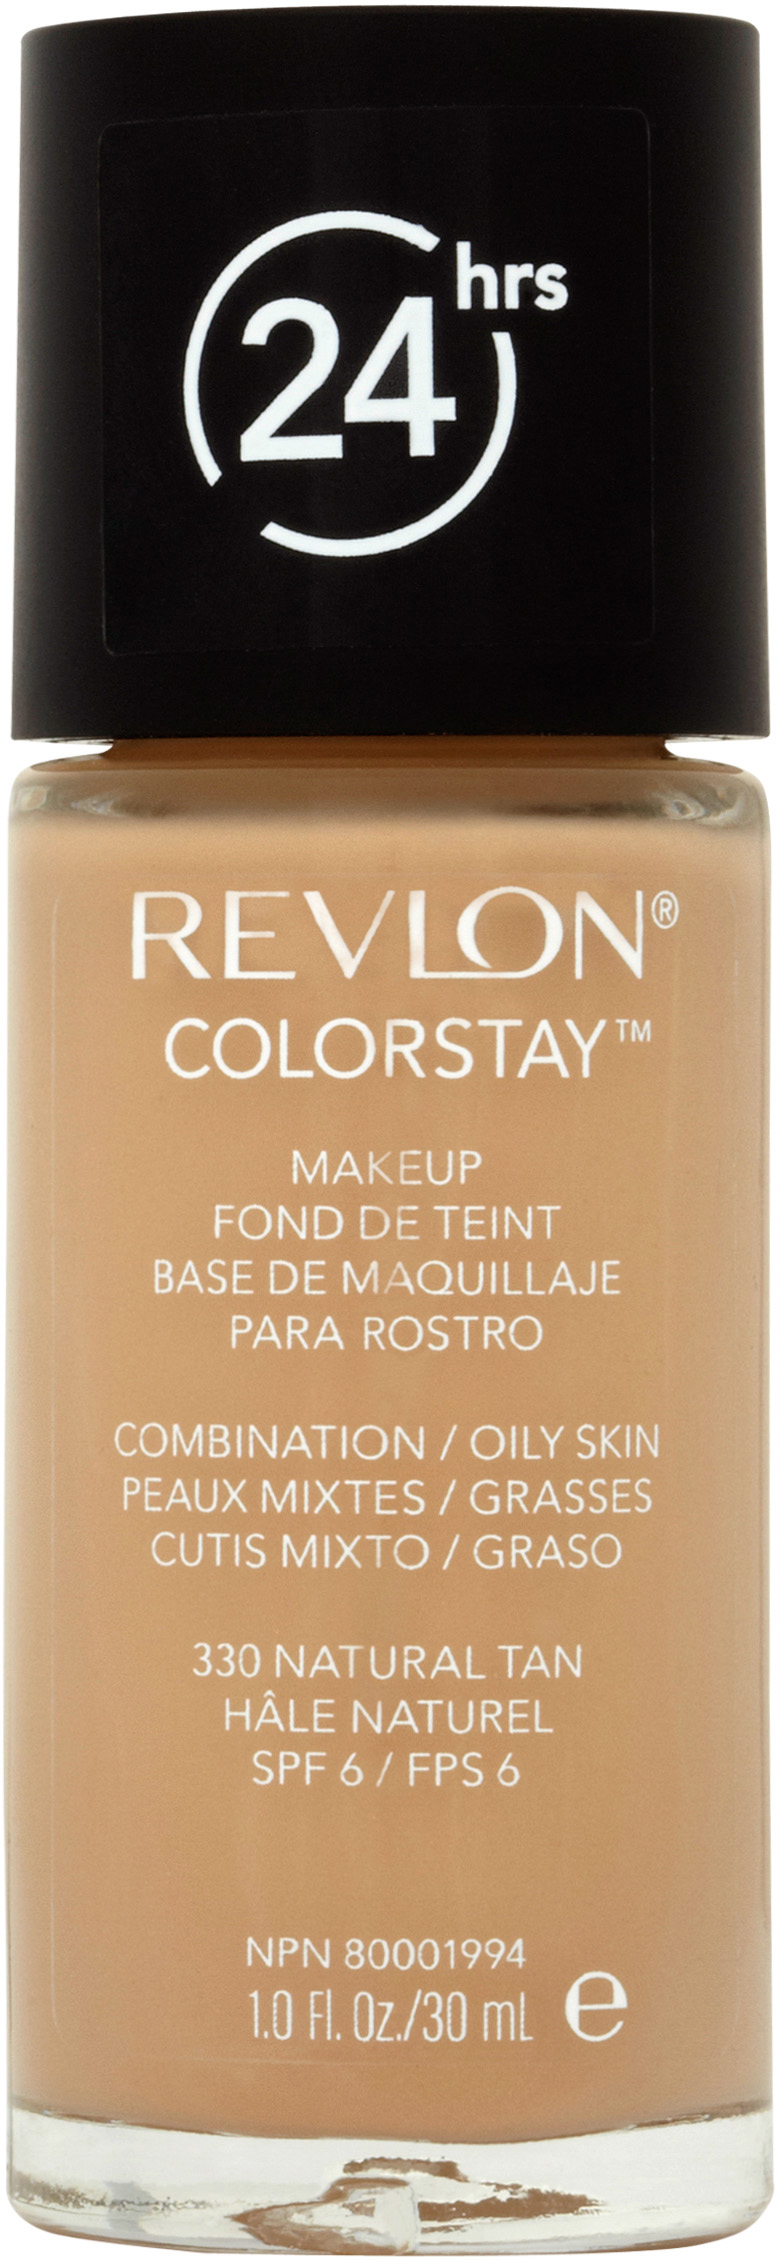 Revlon Cosmetics Colorstay Foundation For Combination/Oily Skin 330